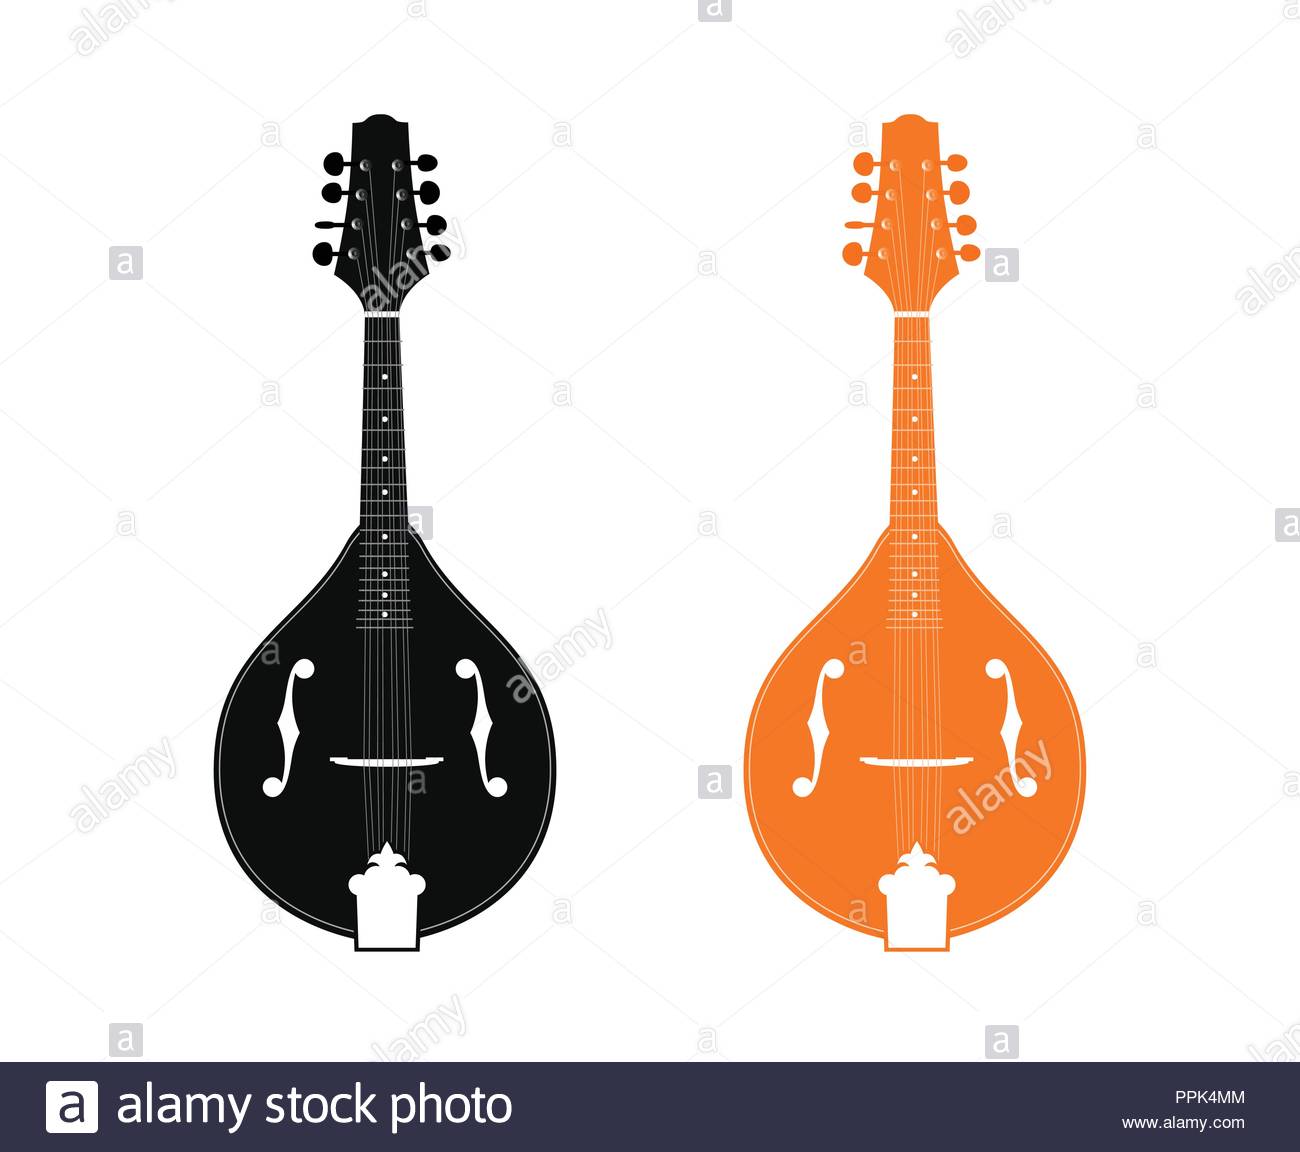 Silhouette Of Mandolin In Black And Orange Color Isolated On White